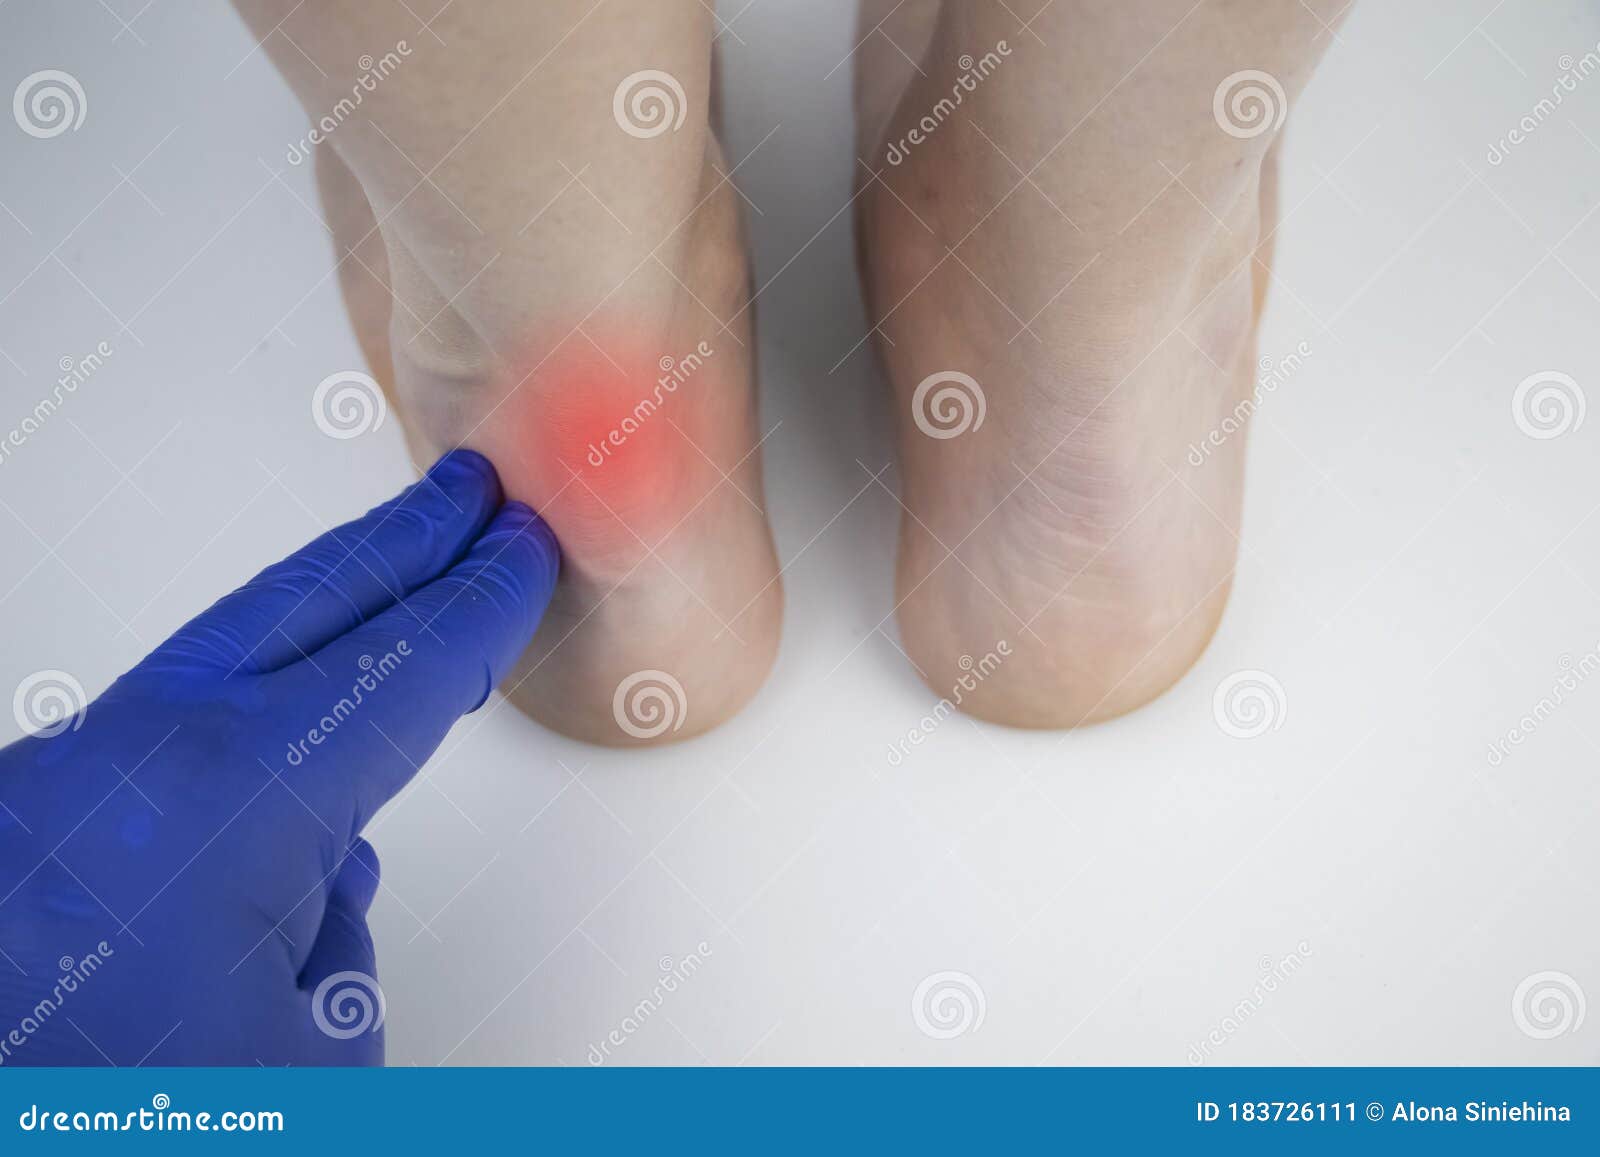 an orthopedic doctor examines a woman`s leg. achilles tendon and ankle diseases. inflammation of the heel and foot,